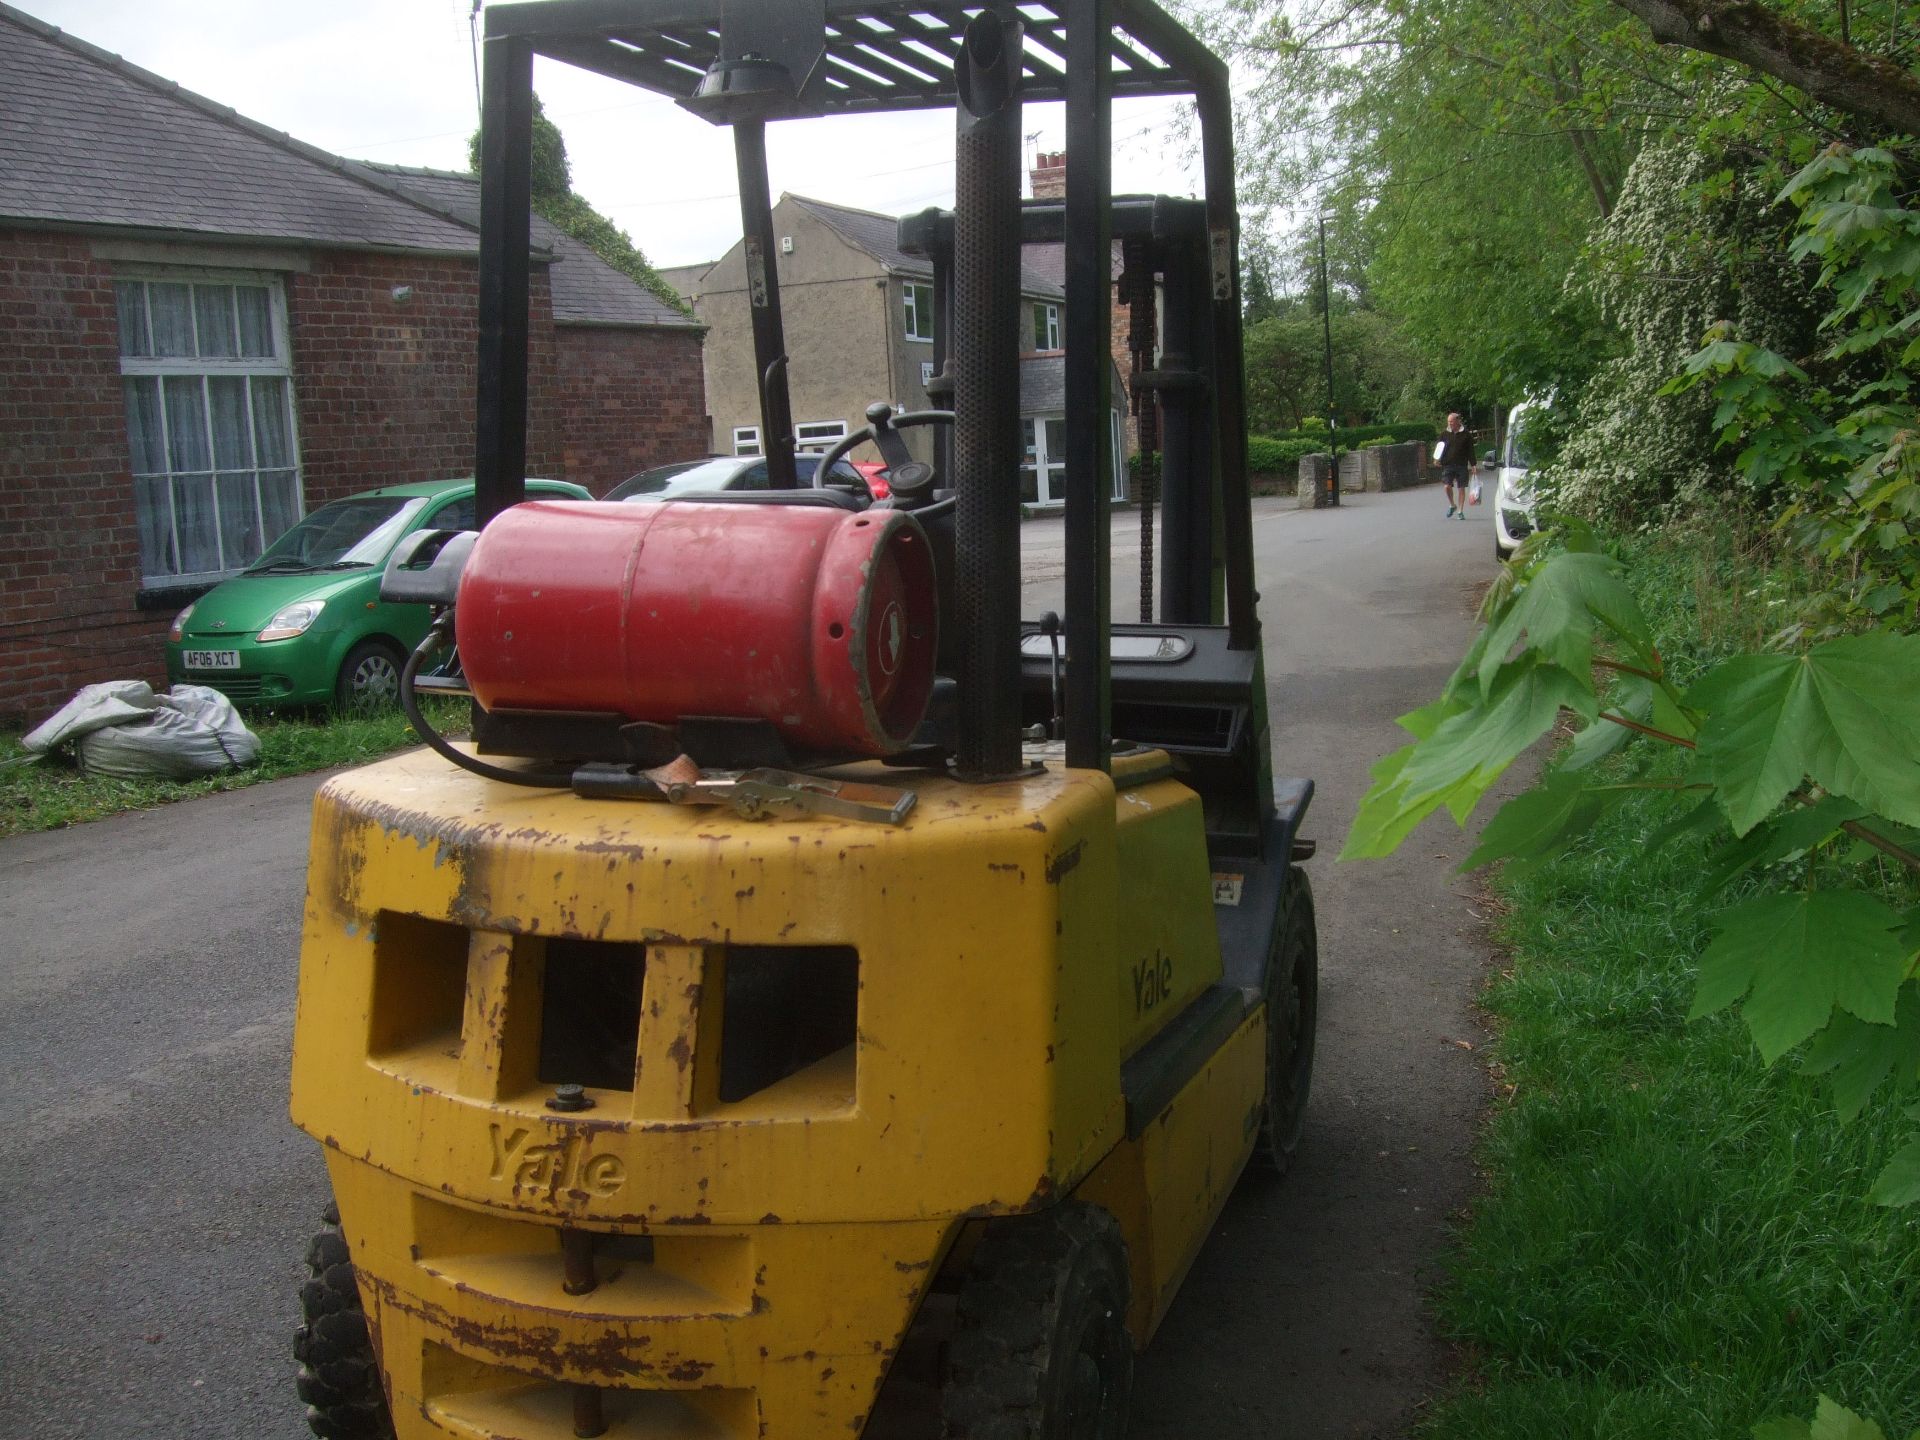 YALE GDP 25 GAS FORKLIFT - 2.5 TONNE CAPACITY - DUPLEX MAST - 13071 RECORDED HOURS - Image 2 of 4